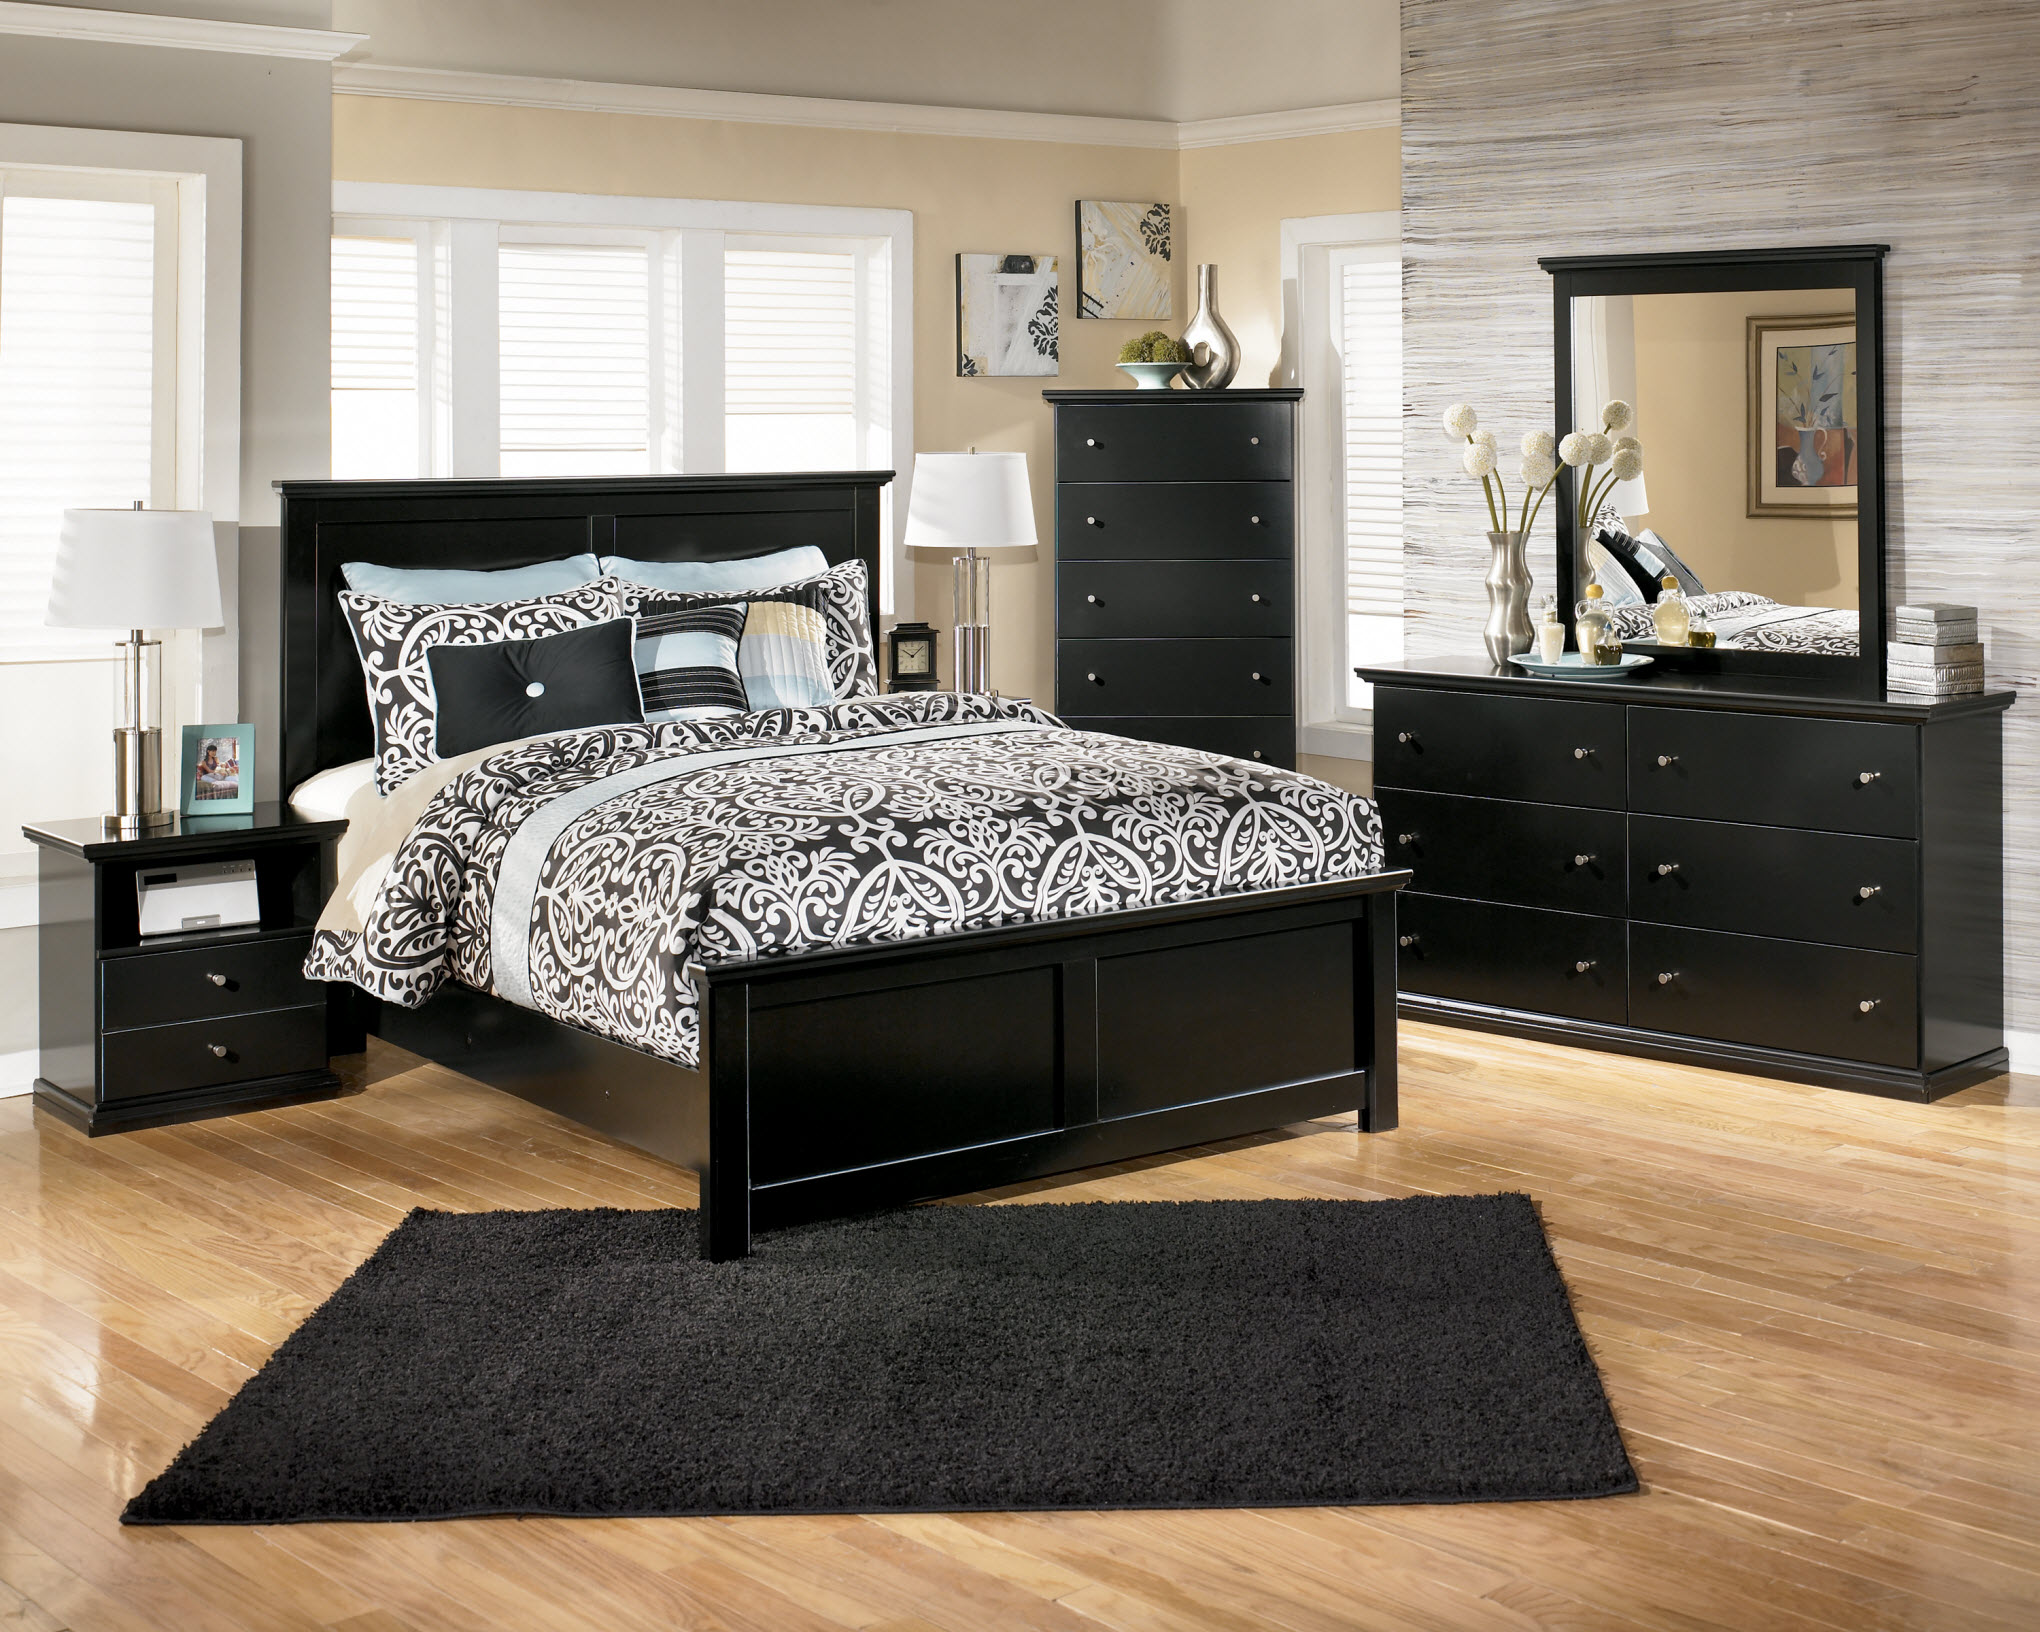 bedroom with black furniture paint color